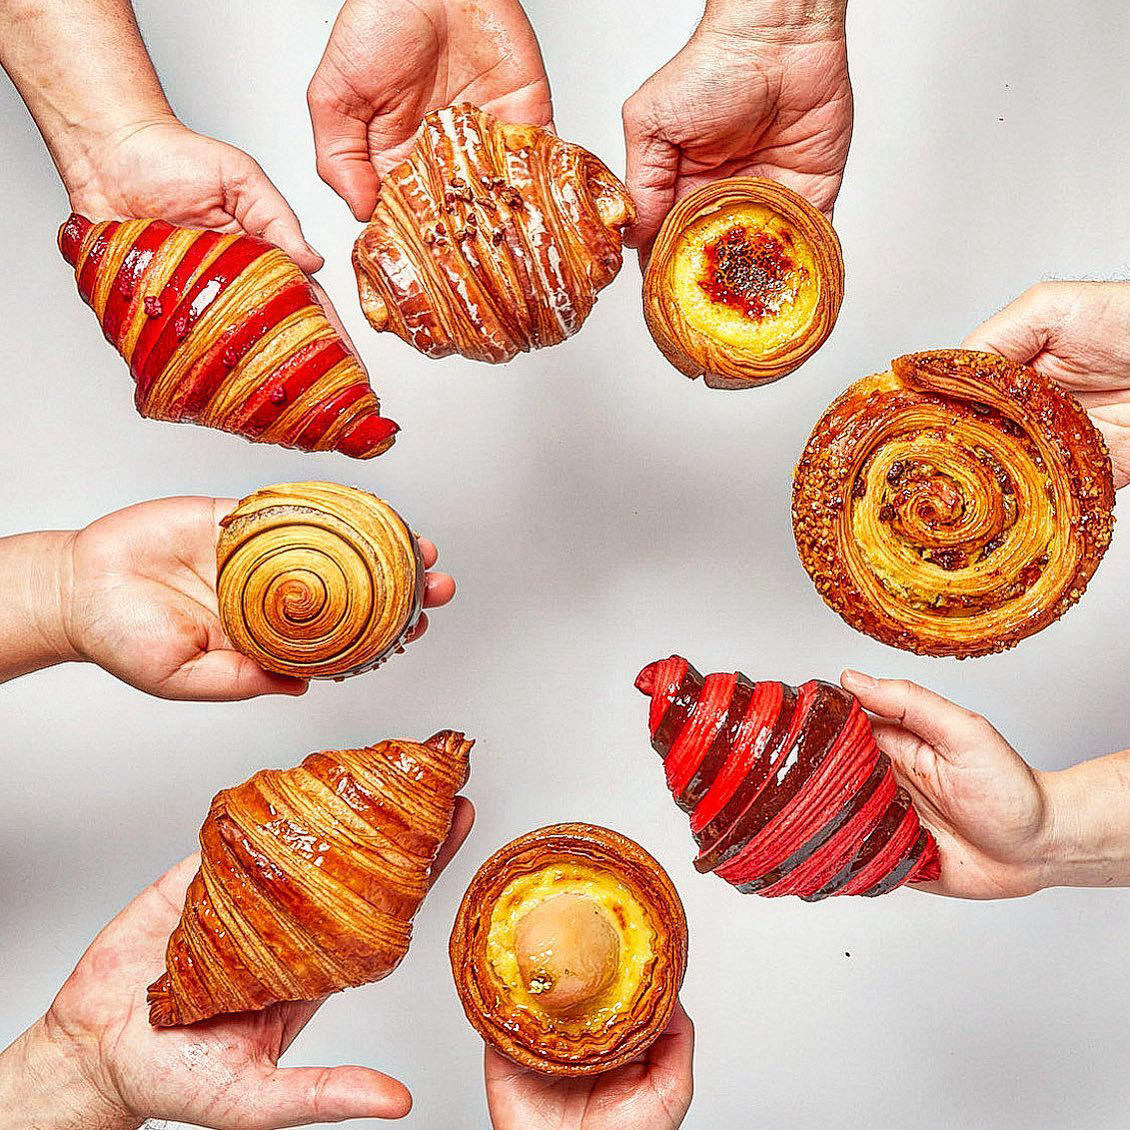 Antonio Bachour - Some croissants from the Viennoiseries and Brioches Chapter from my book Bachour B